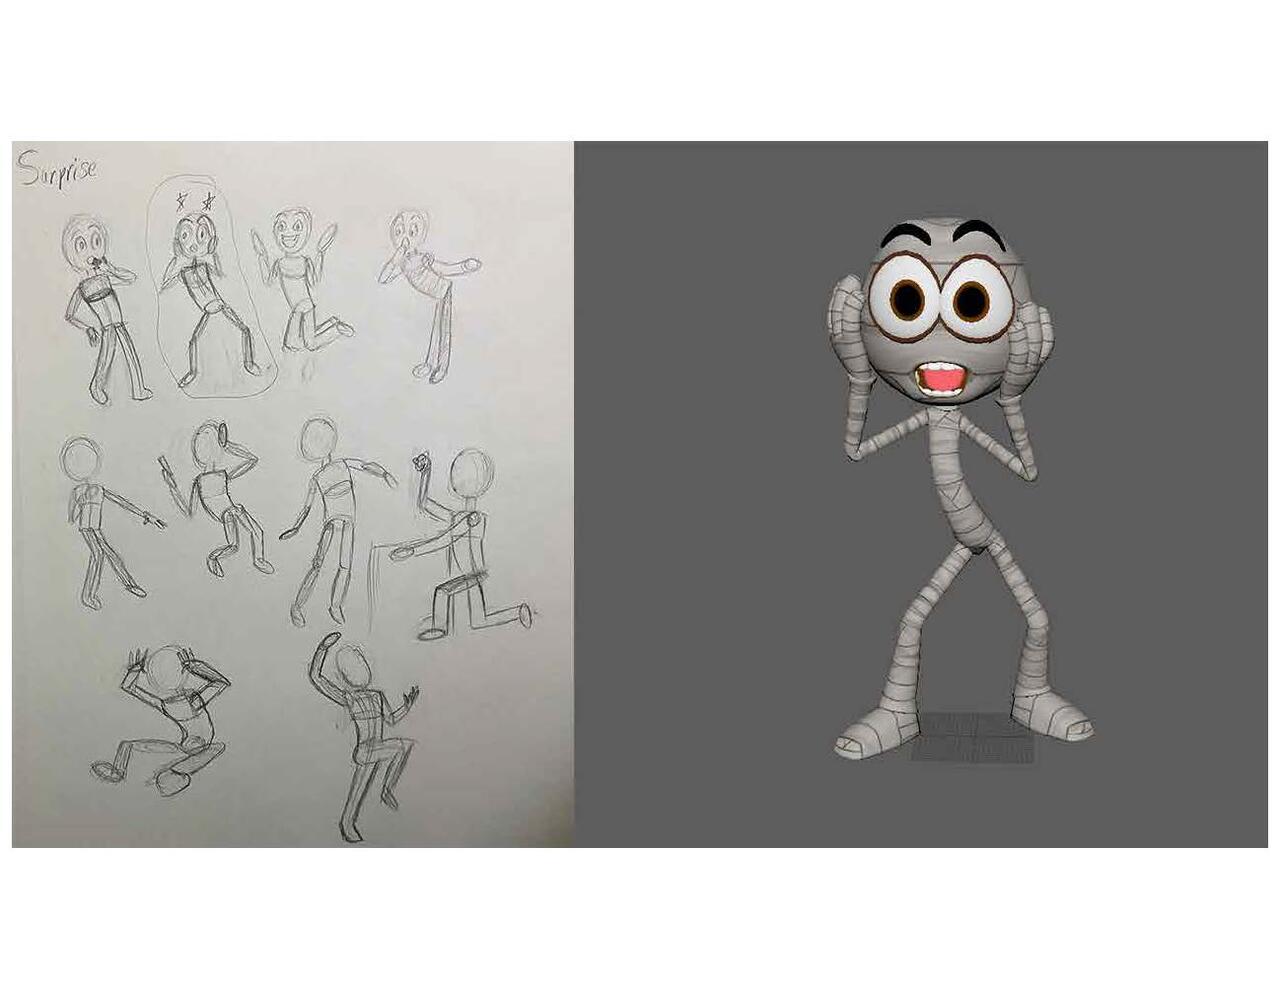 4 Basic Animation Principles for Beginners